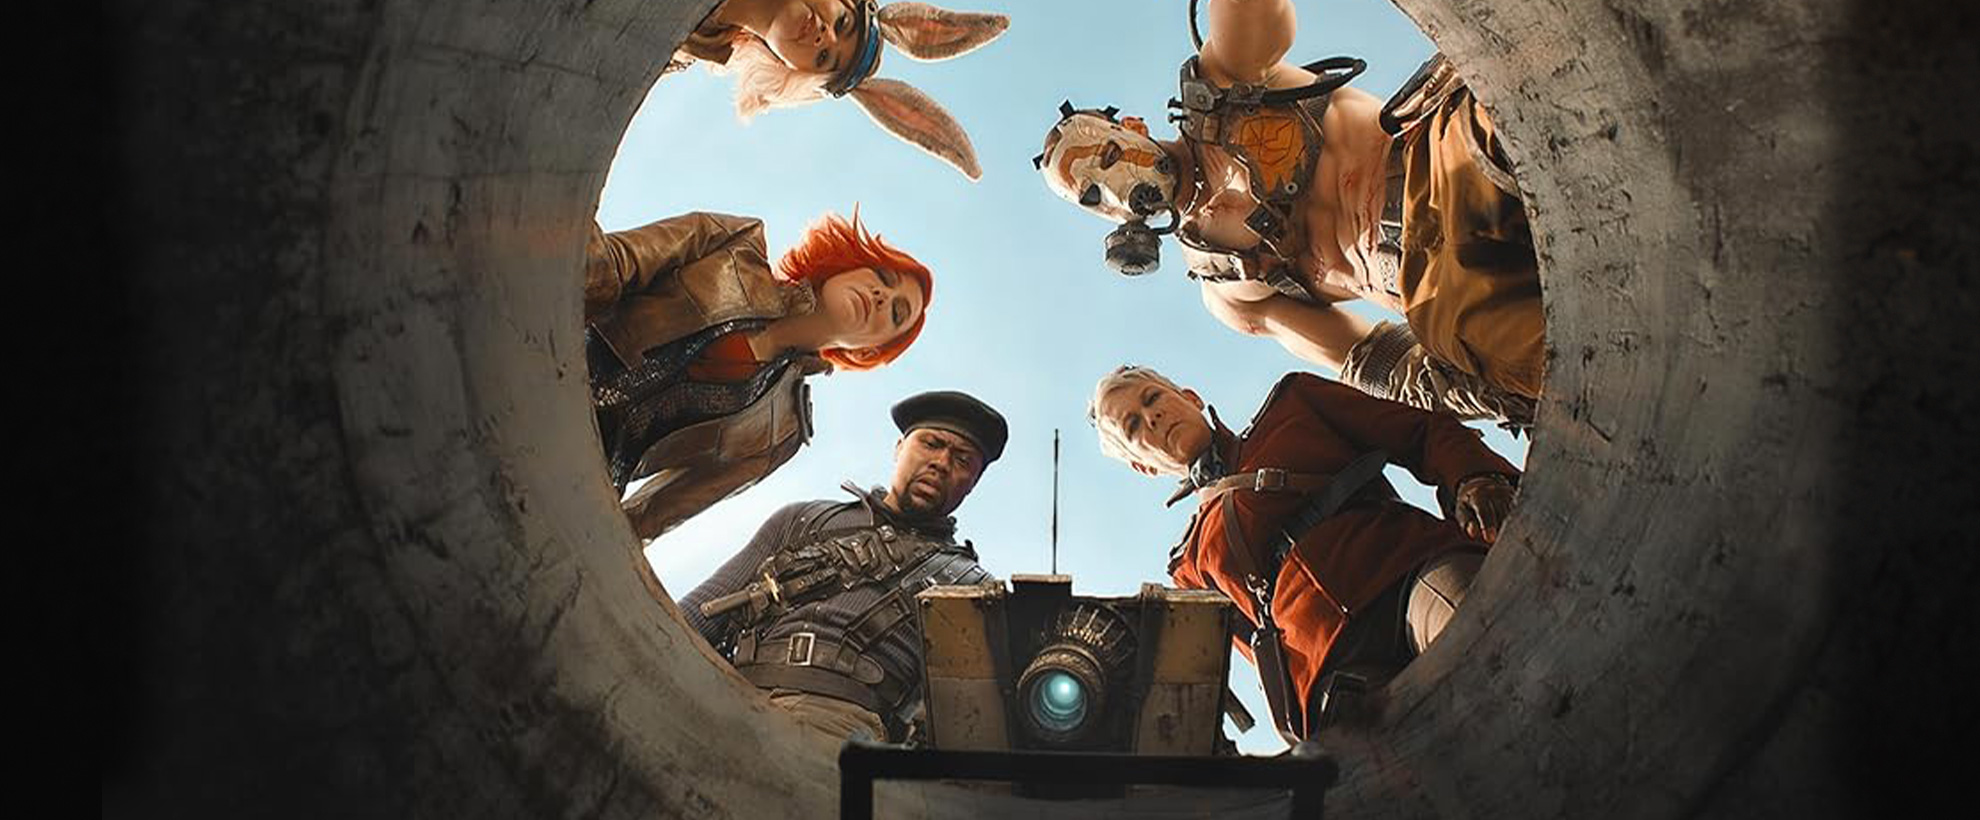 The cast of Borderlands peering down a manhole or drain